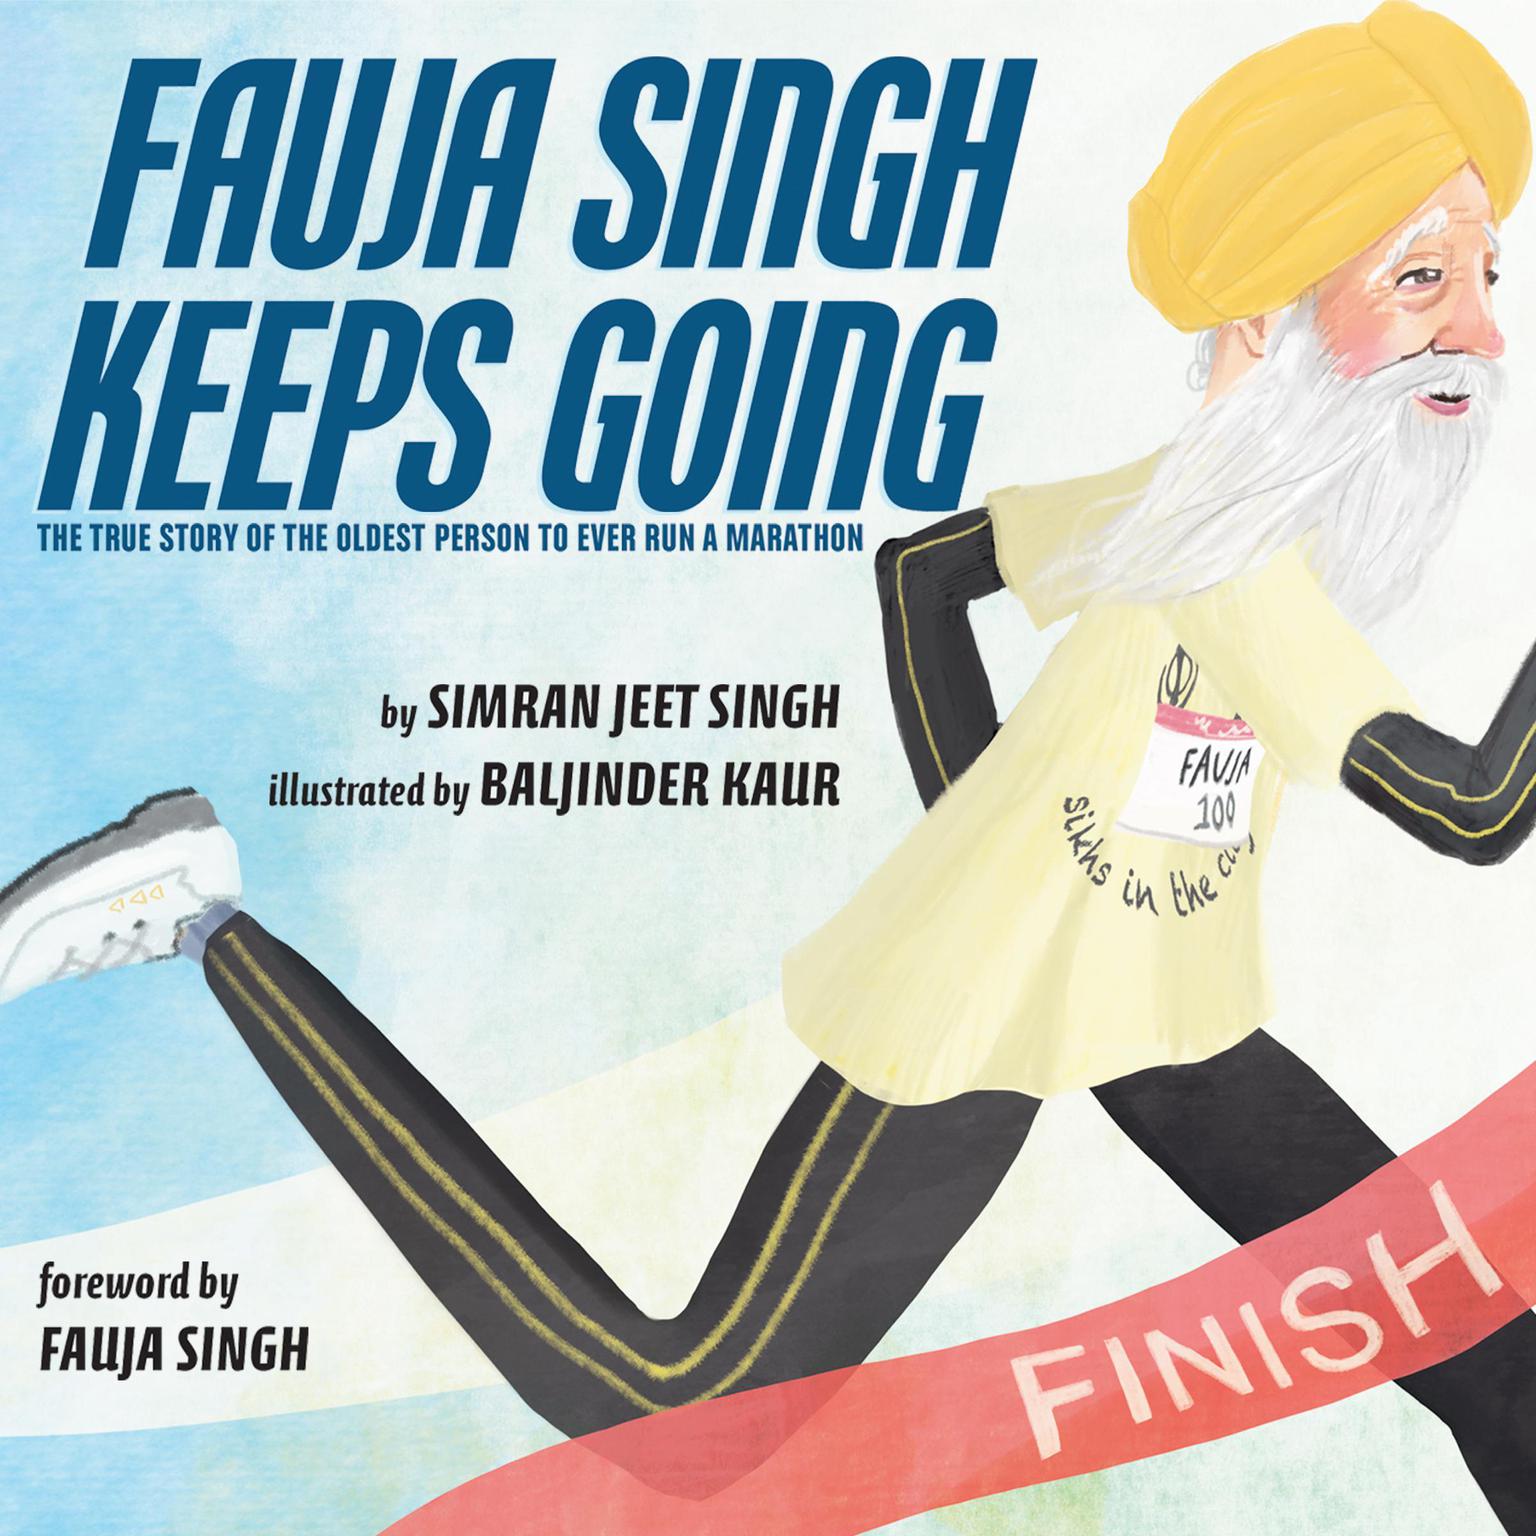 Fauja Singh Keeps Going: The True Story of the Oldest Person to Ever Run a Marathon Audiobook, by Simran Jeet Singh